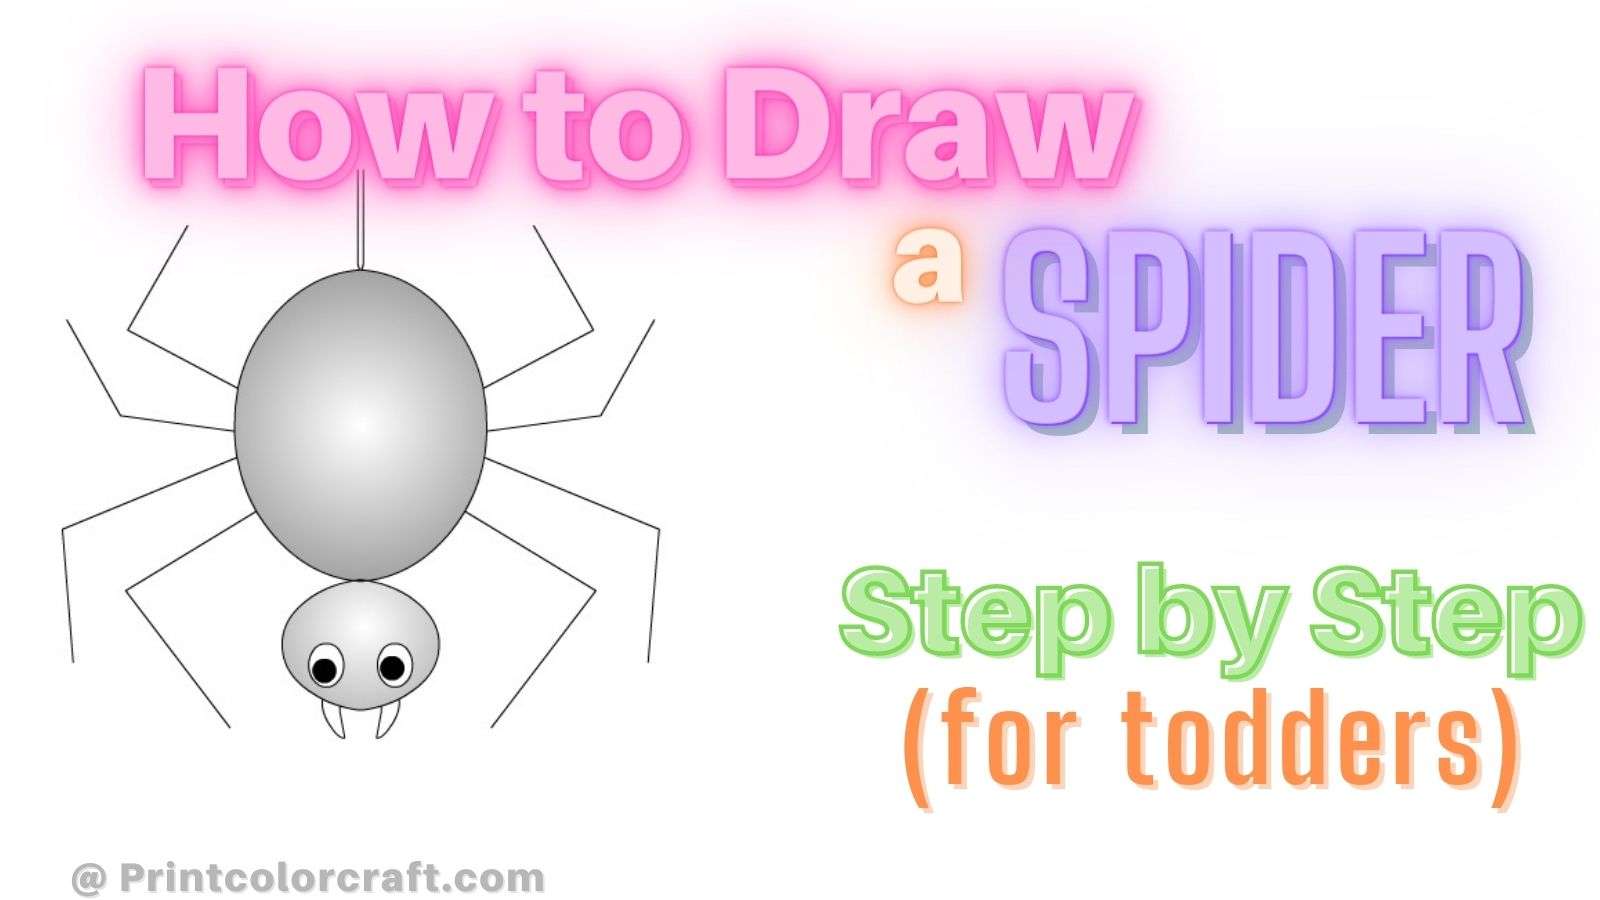 How to Draw a Spider Step by Step Pictures